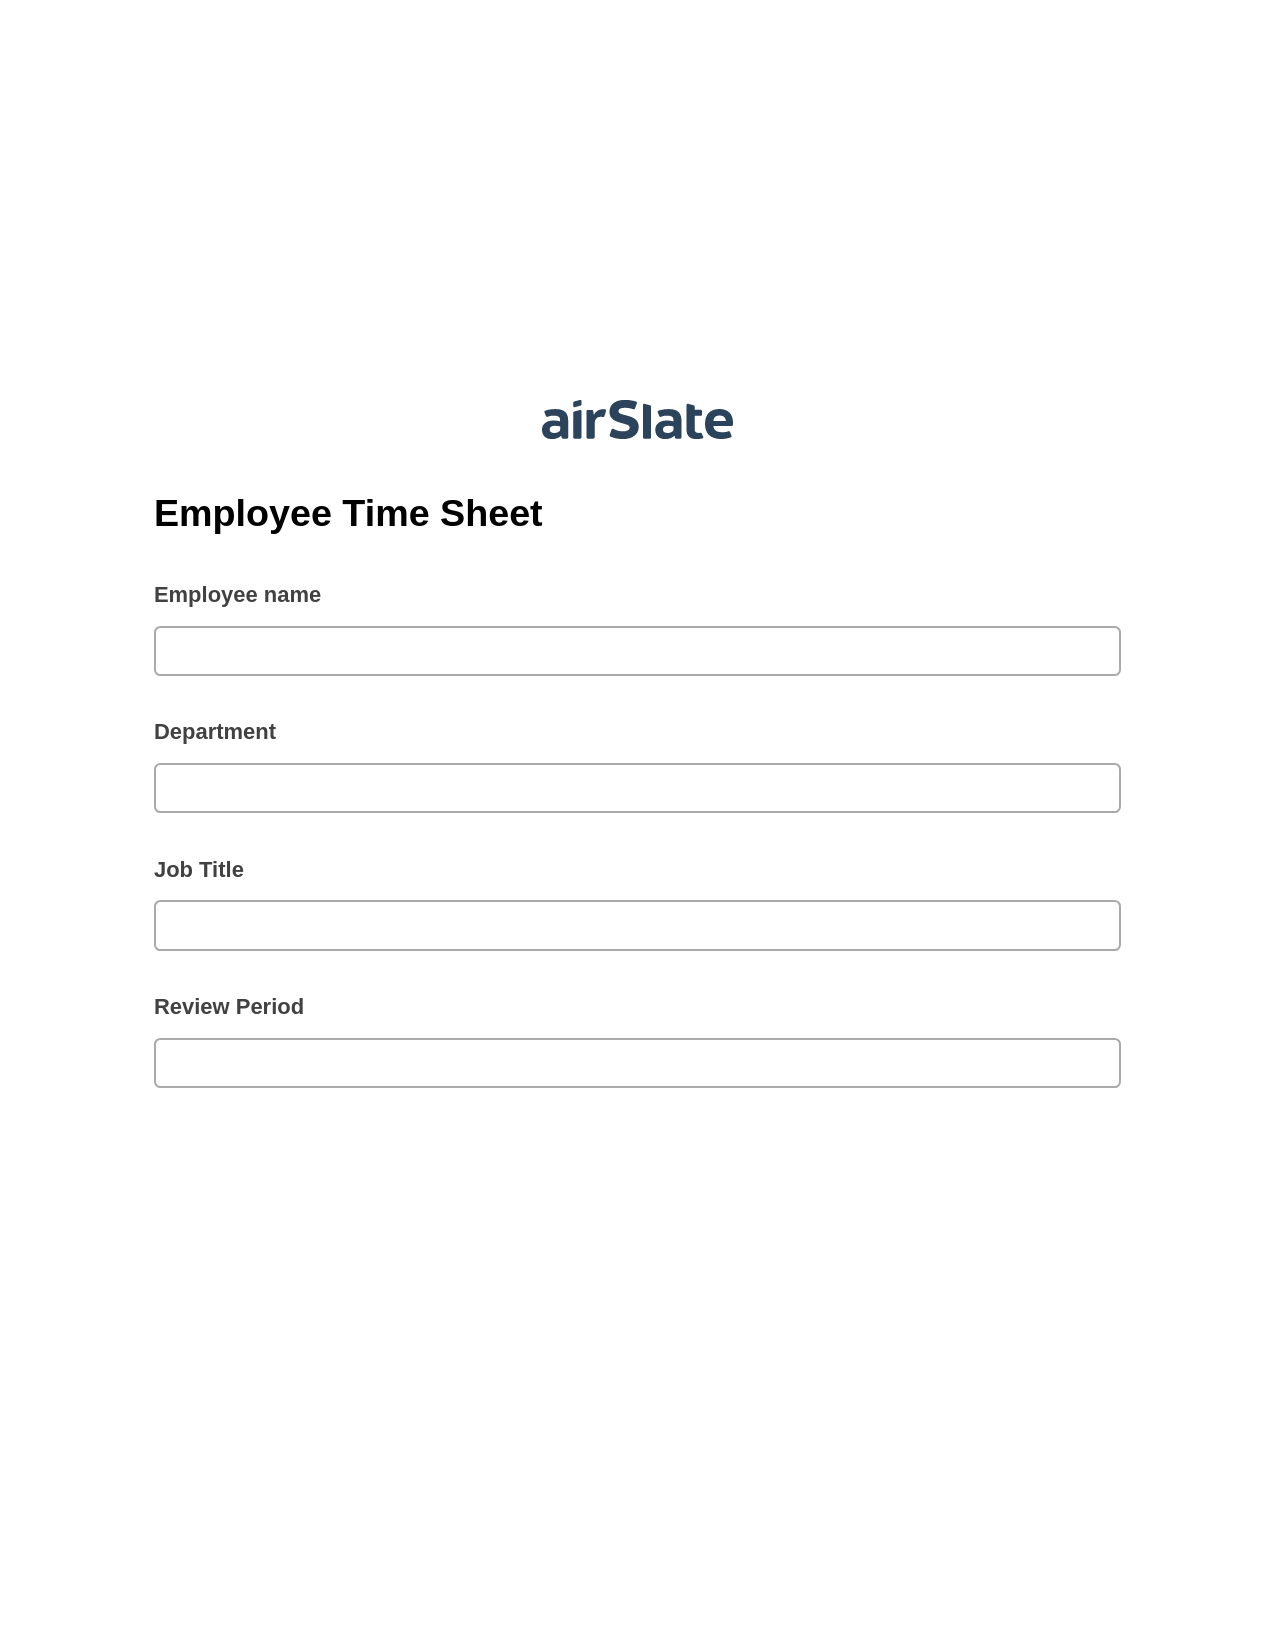 Employee Time Sheet Pre-fill from Salesforce Records Bot, Update Audit Trail Bot, Archive to Dropbox Bot